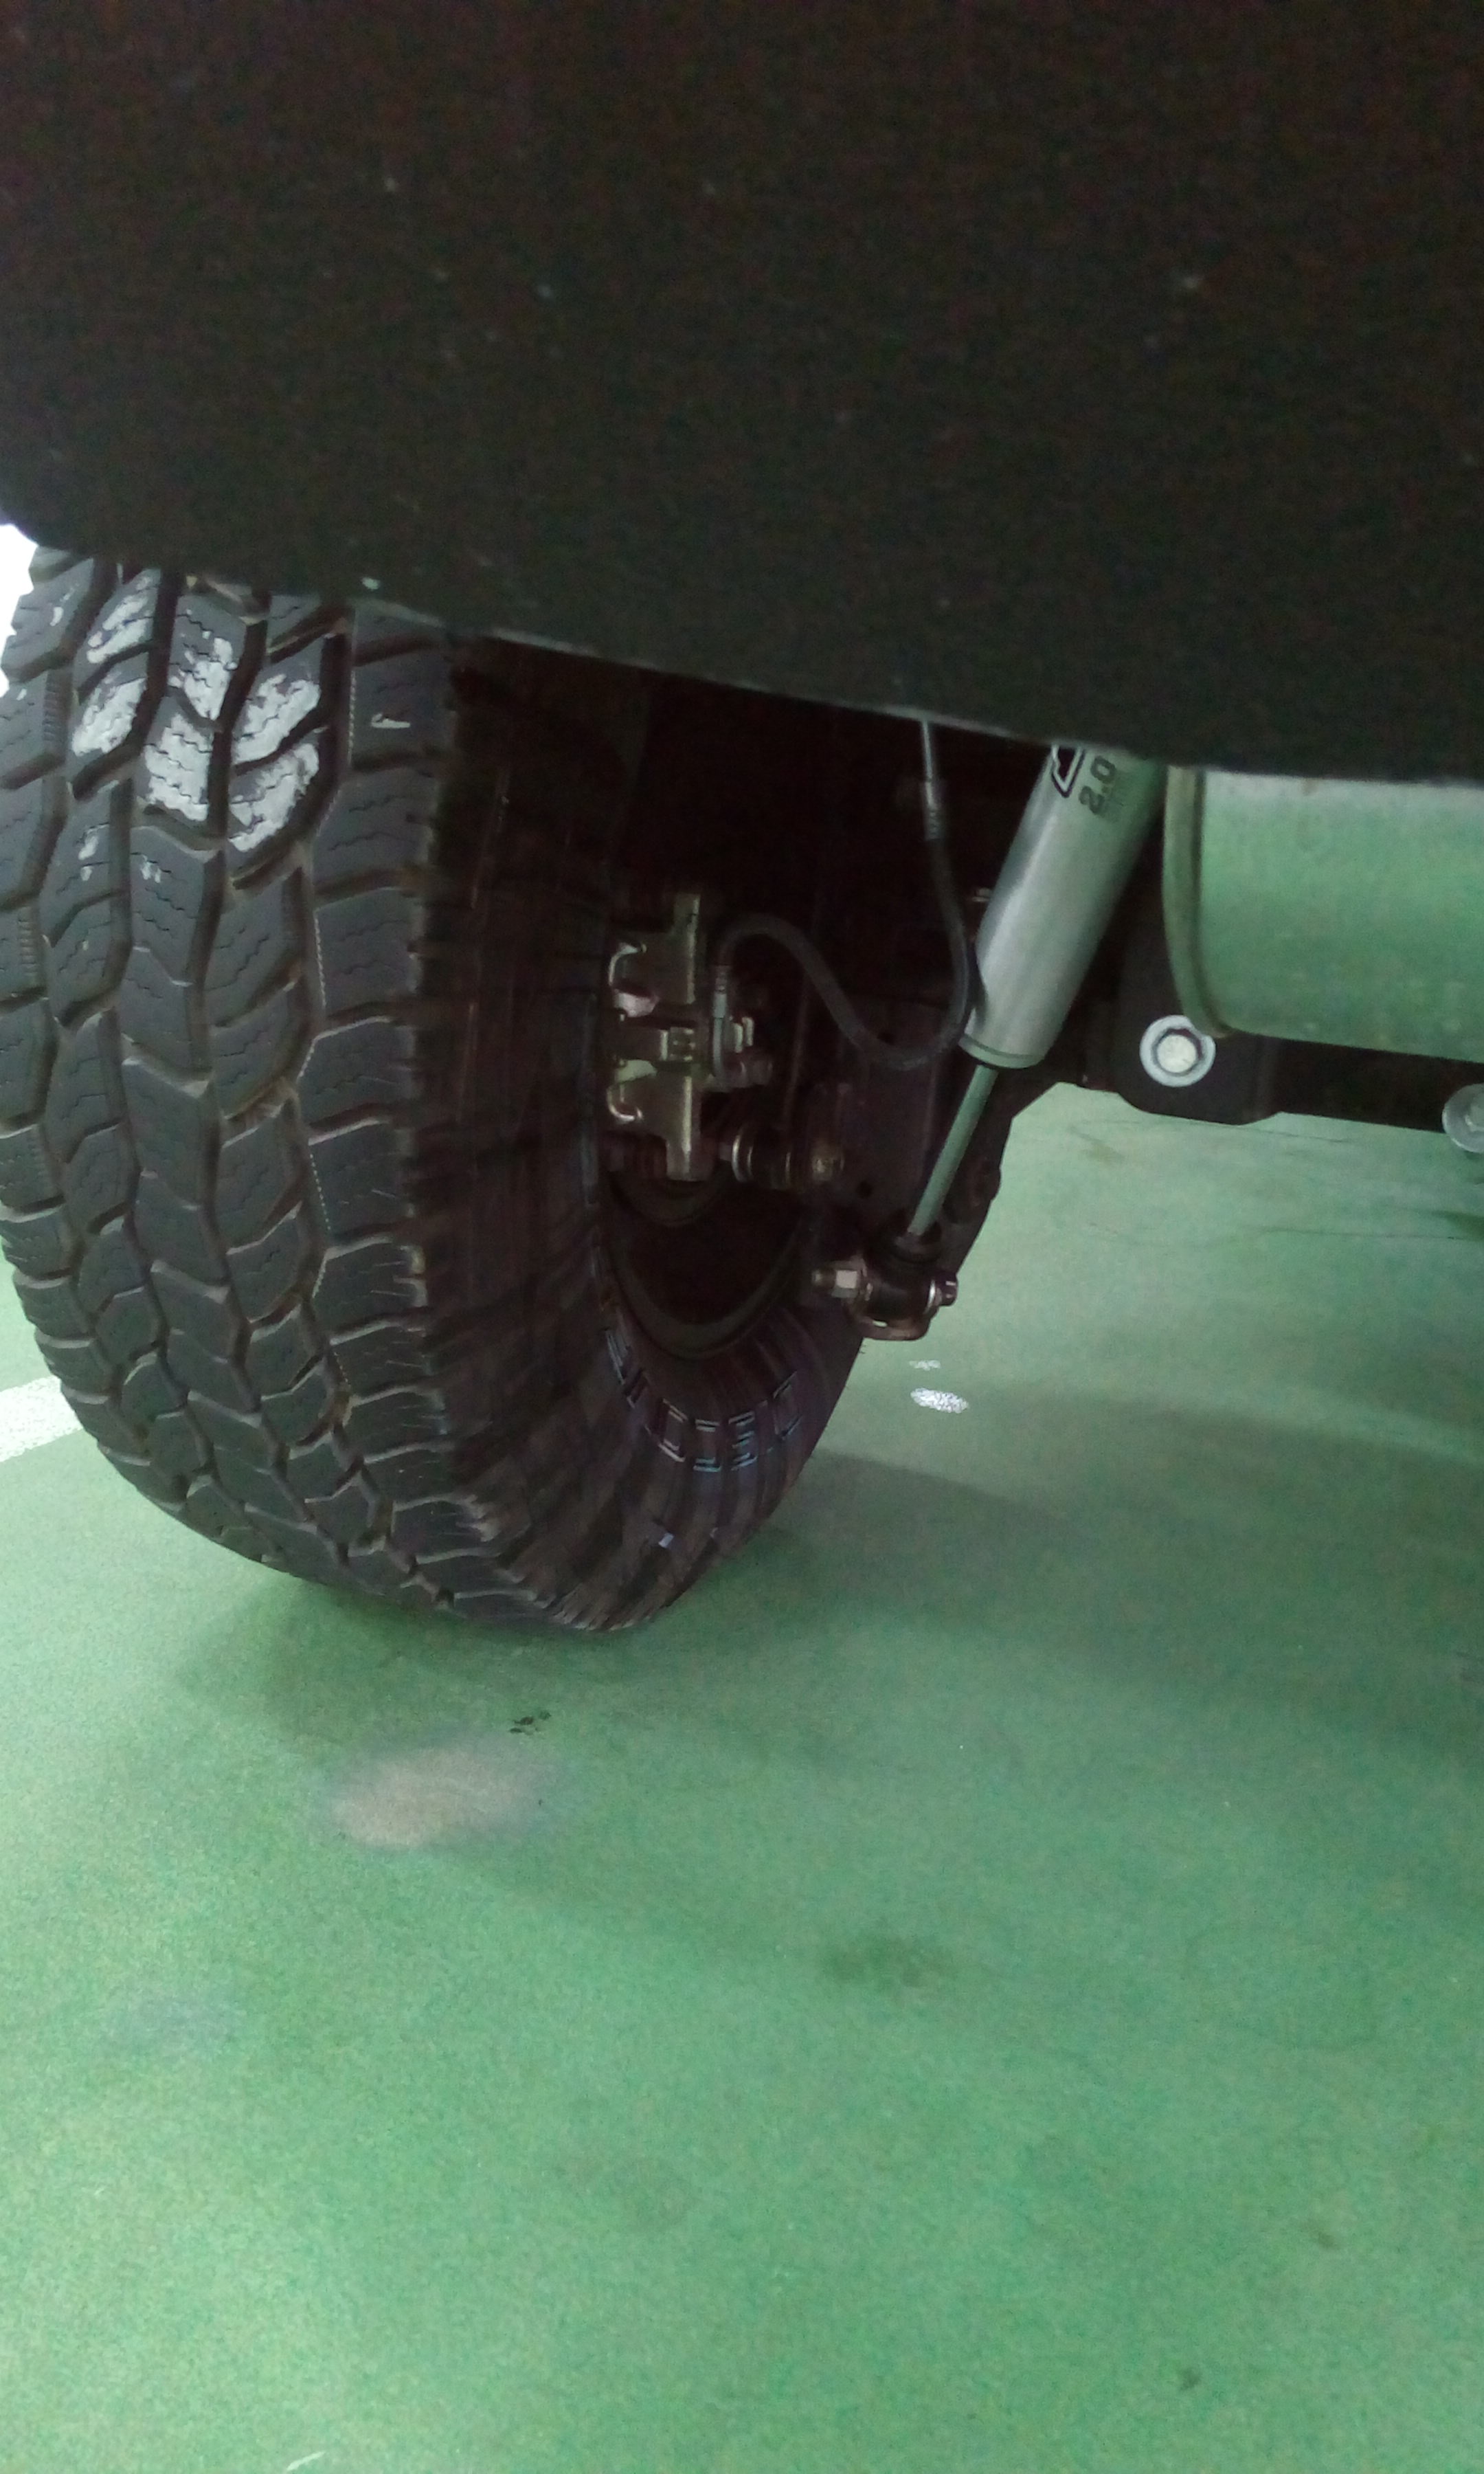 Leaking rear axle seal - 13 JKU 10k miles- common issue??  -  The top destination for Jeep JK and JL Wrangler news, rumors, and discussion